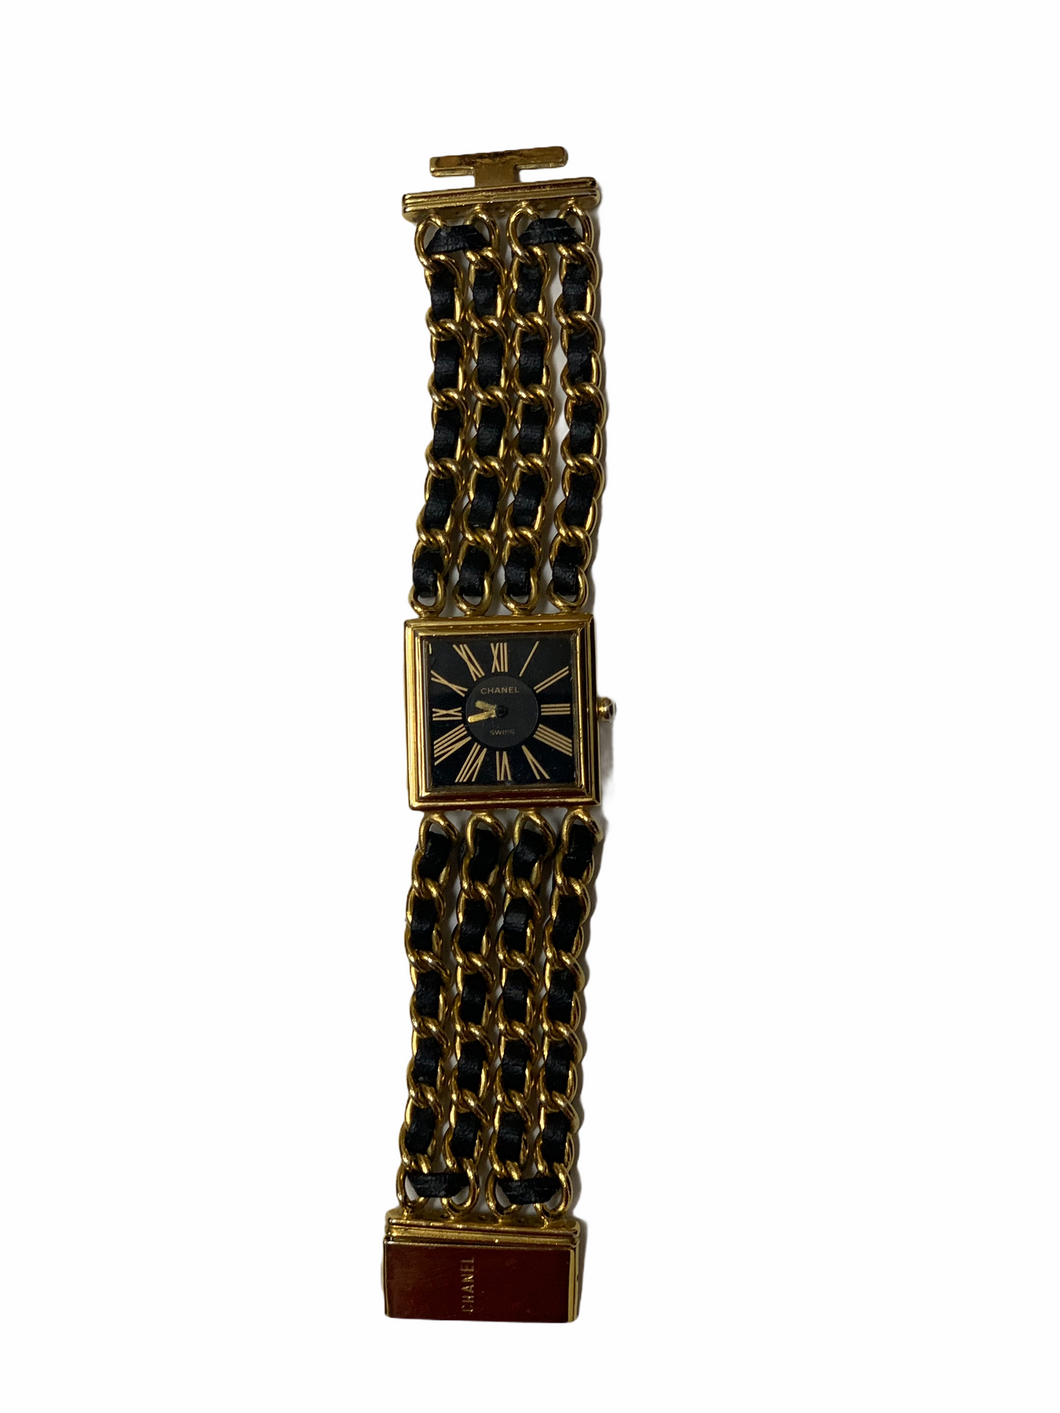 AUTHENTIC CHANEL VINTAGE WOVEN CHAIN MADEMOISELLE 18KT PLATED WRISTWATCH